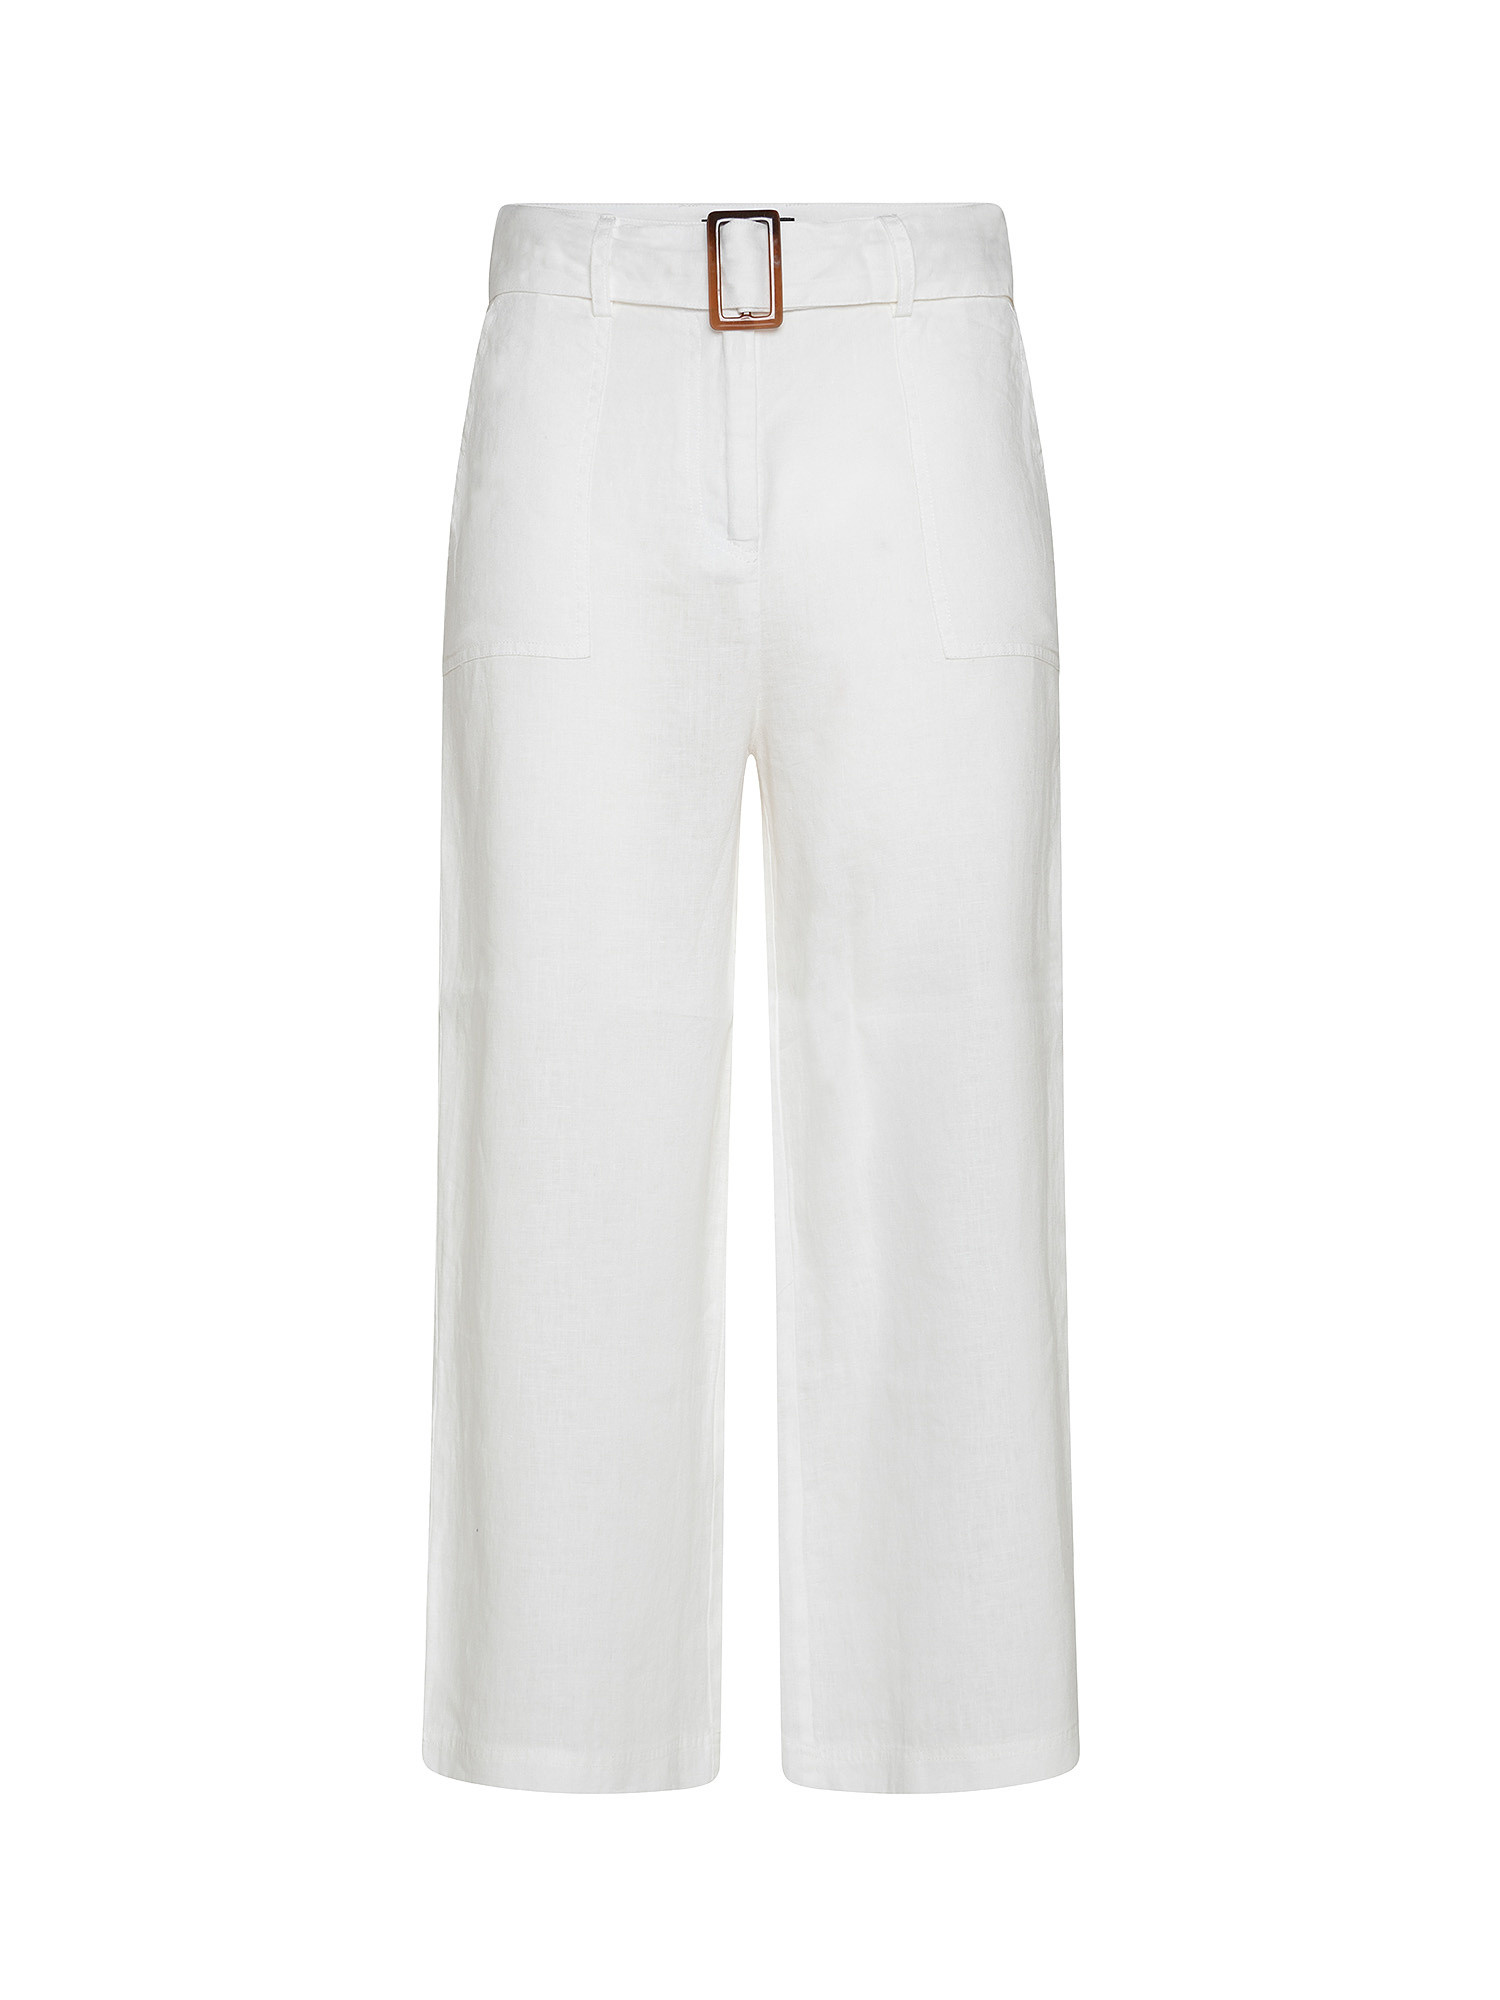 Pure linen 3/4 trousers with belt, White, large image number 0